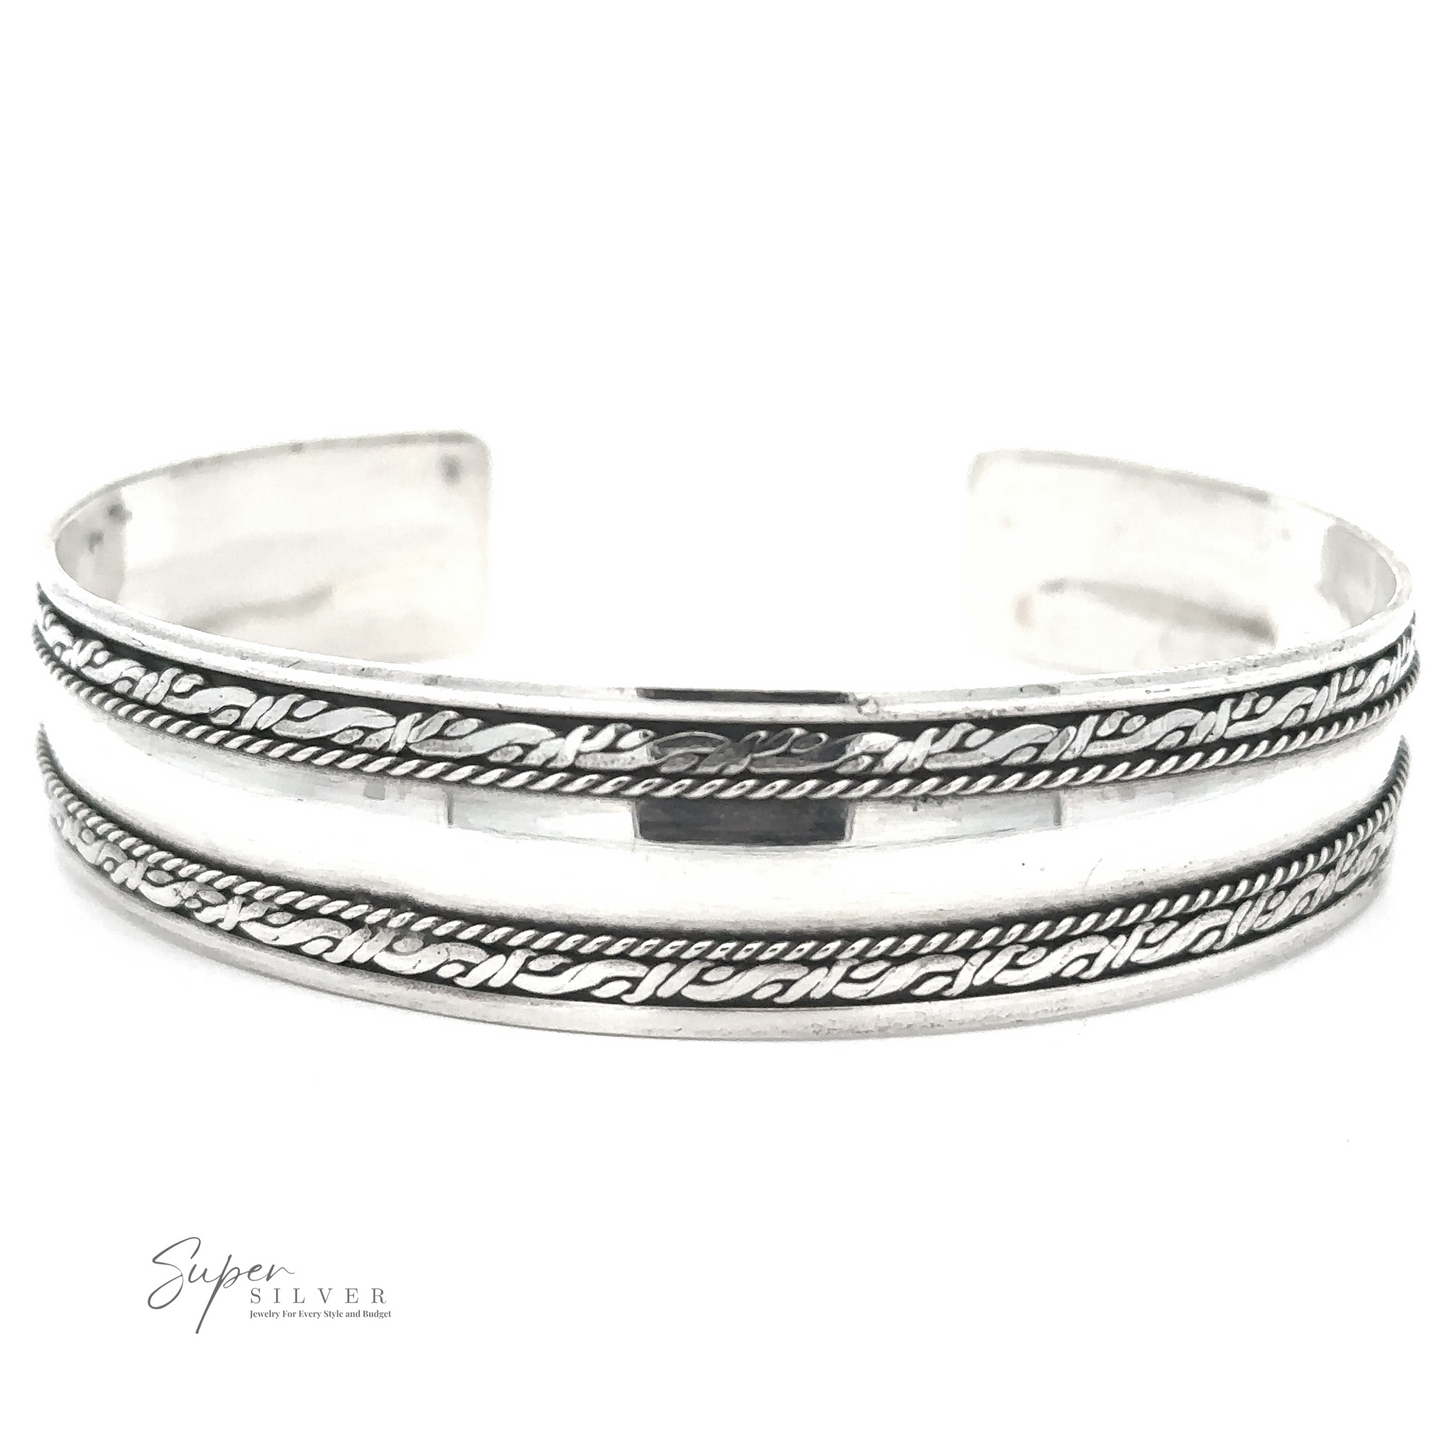 
                  
                    A Silver Domed Cuff with Rope Pattern featuring intricate designs and patterns with an open cuff style, crafted from .925 Sterling Silver and branded "Super Silver" in the lower left corner, inspired by Bali's rich artistic heritage.
                  
                